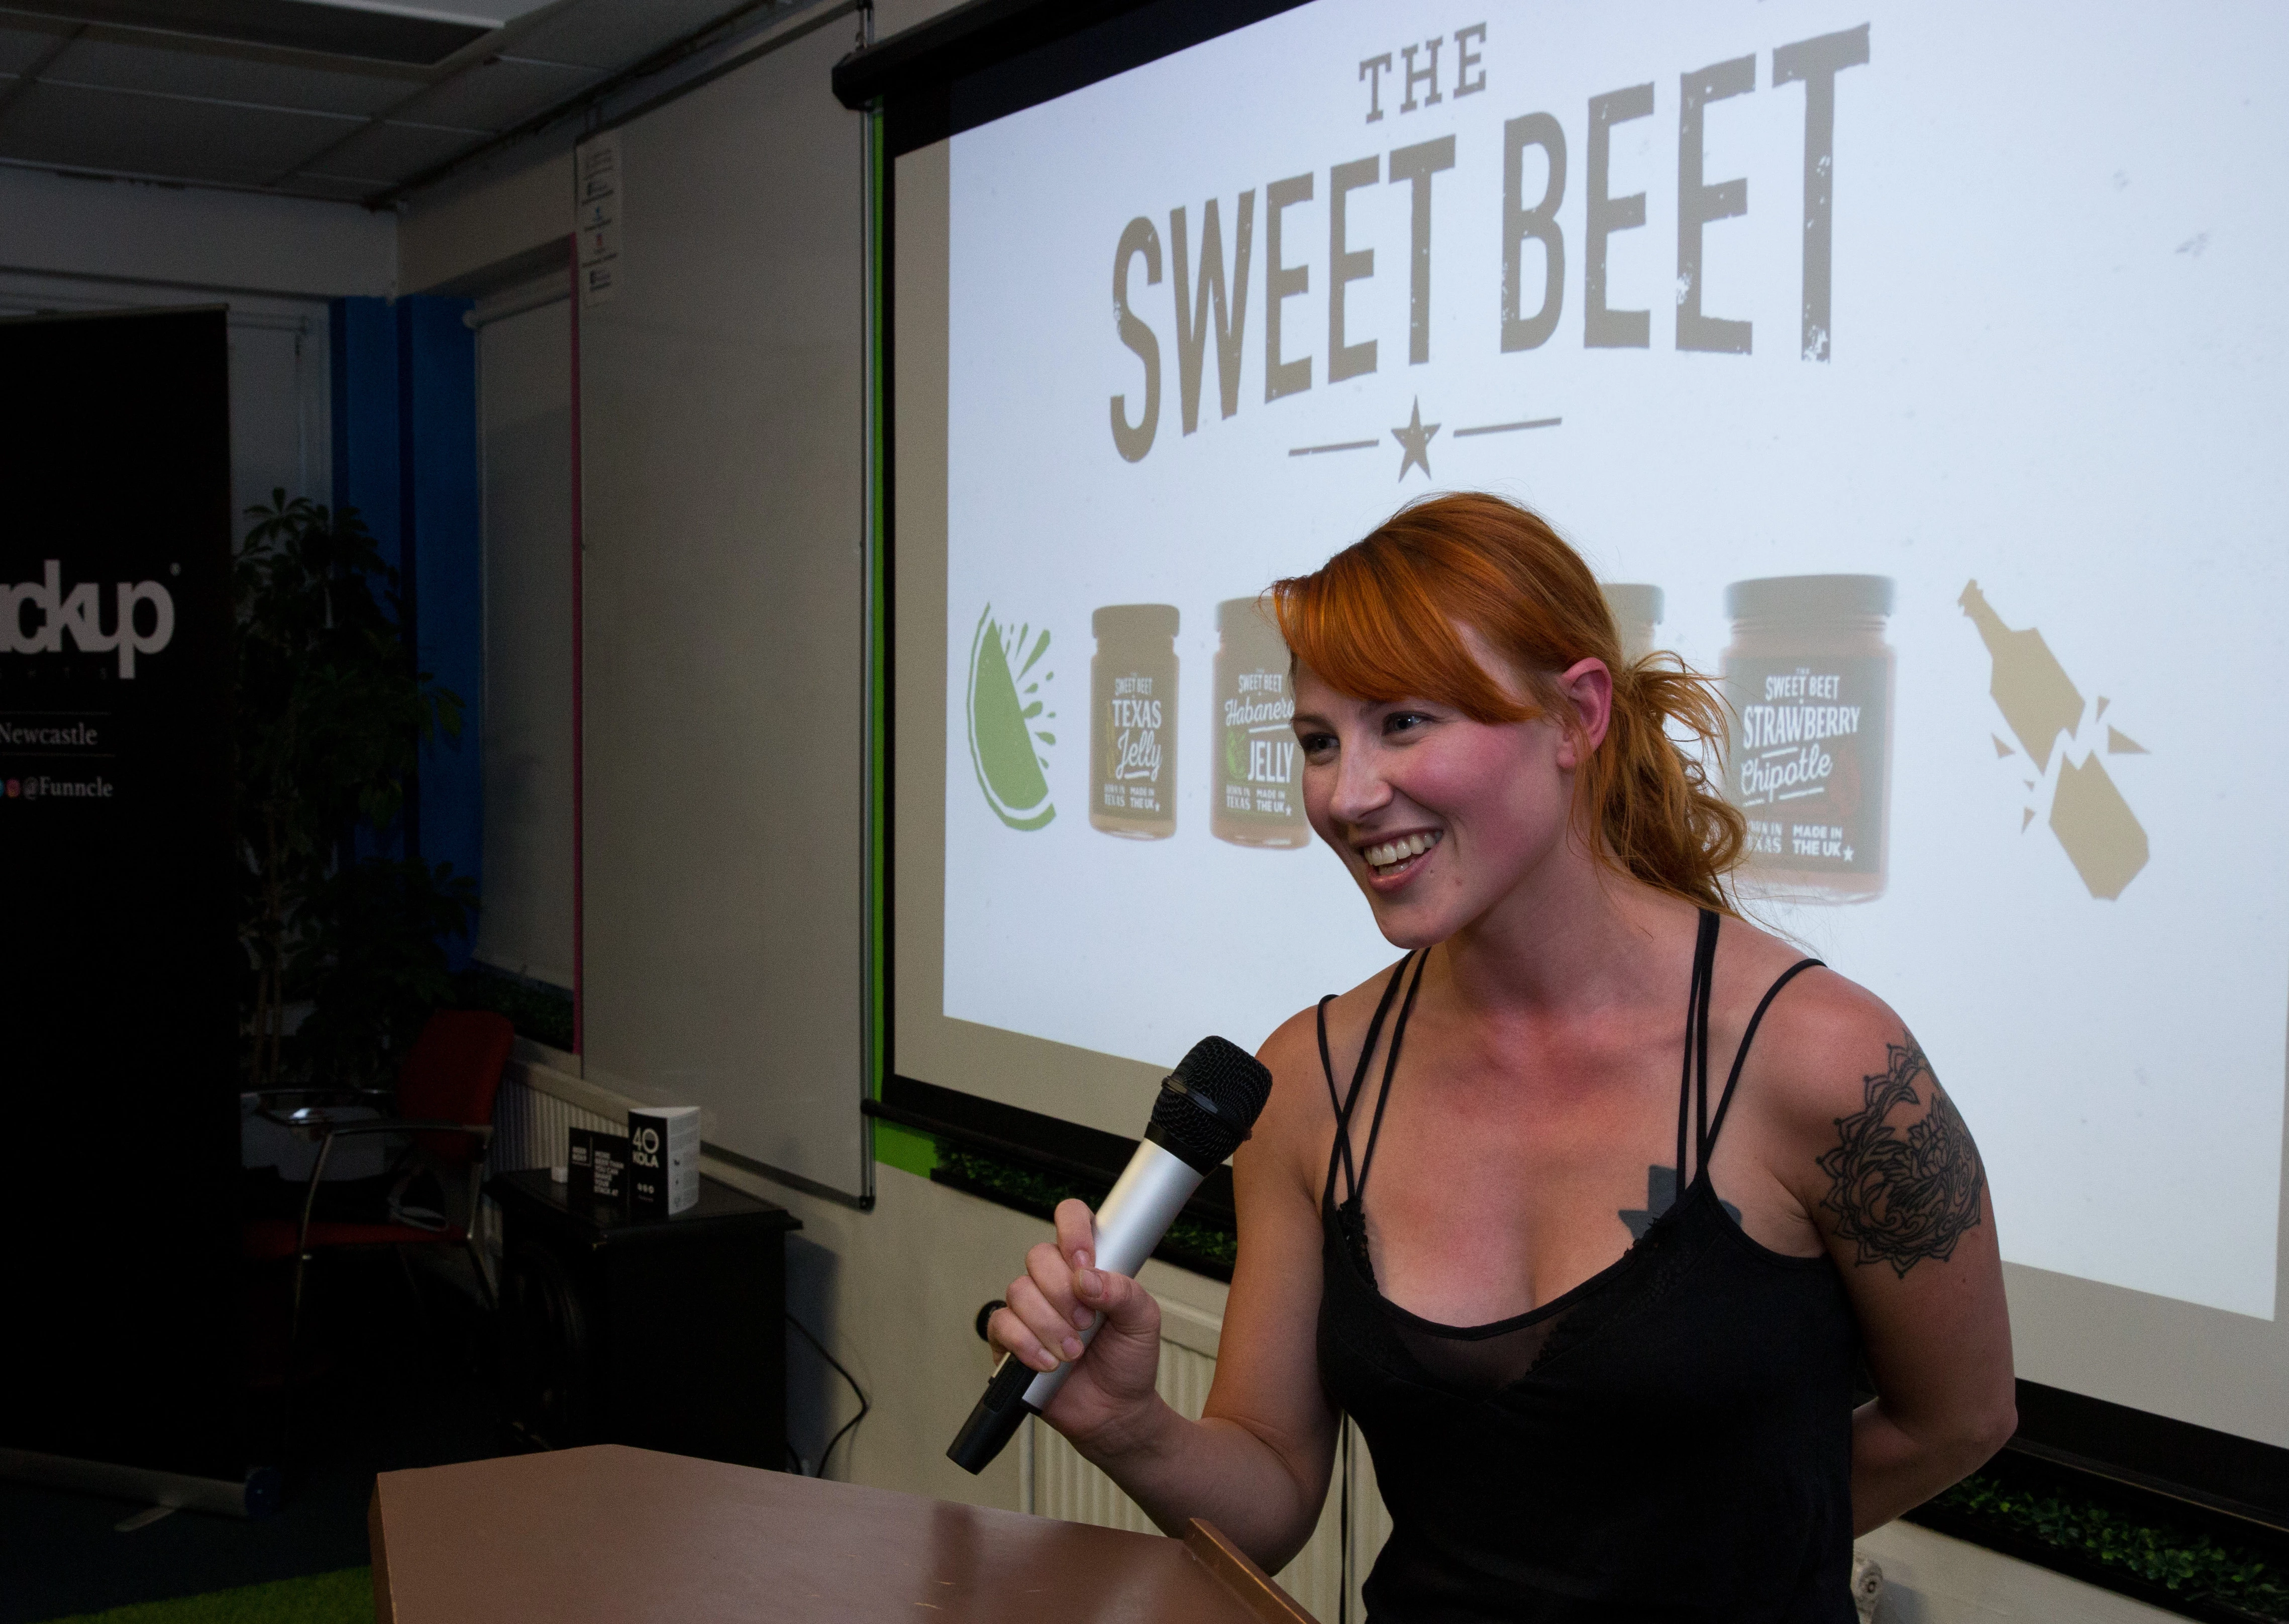 Lizzy Hodcroft, owner of The Sweet Beet